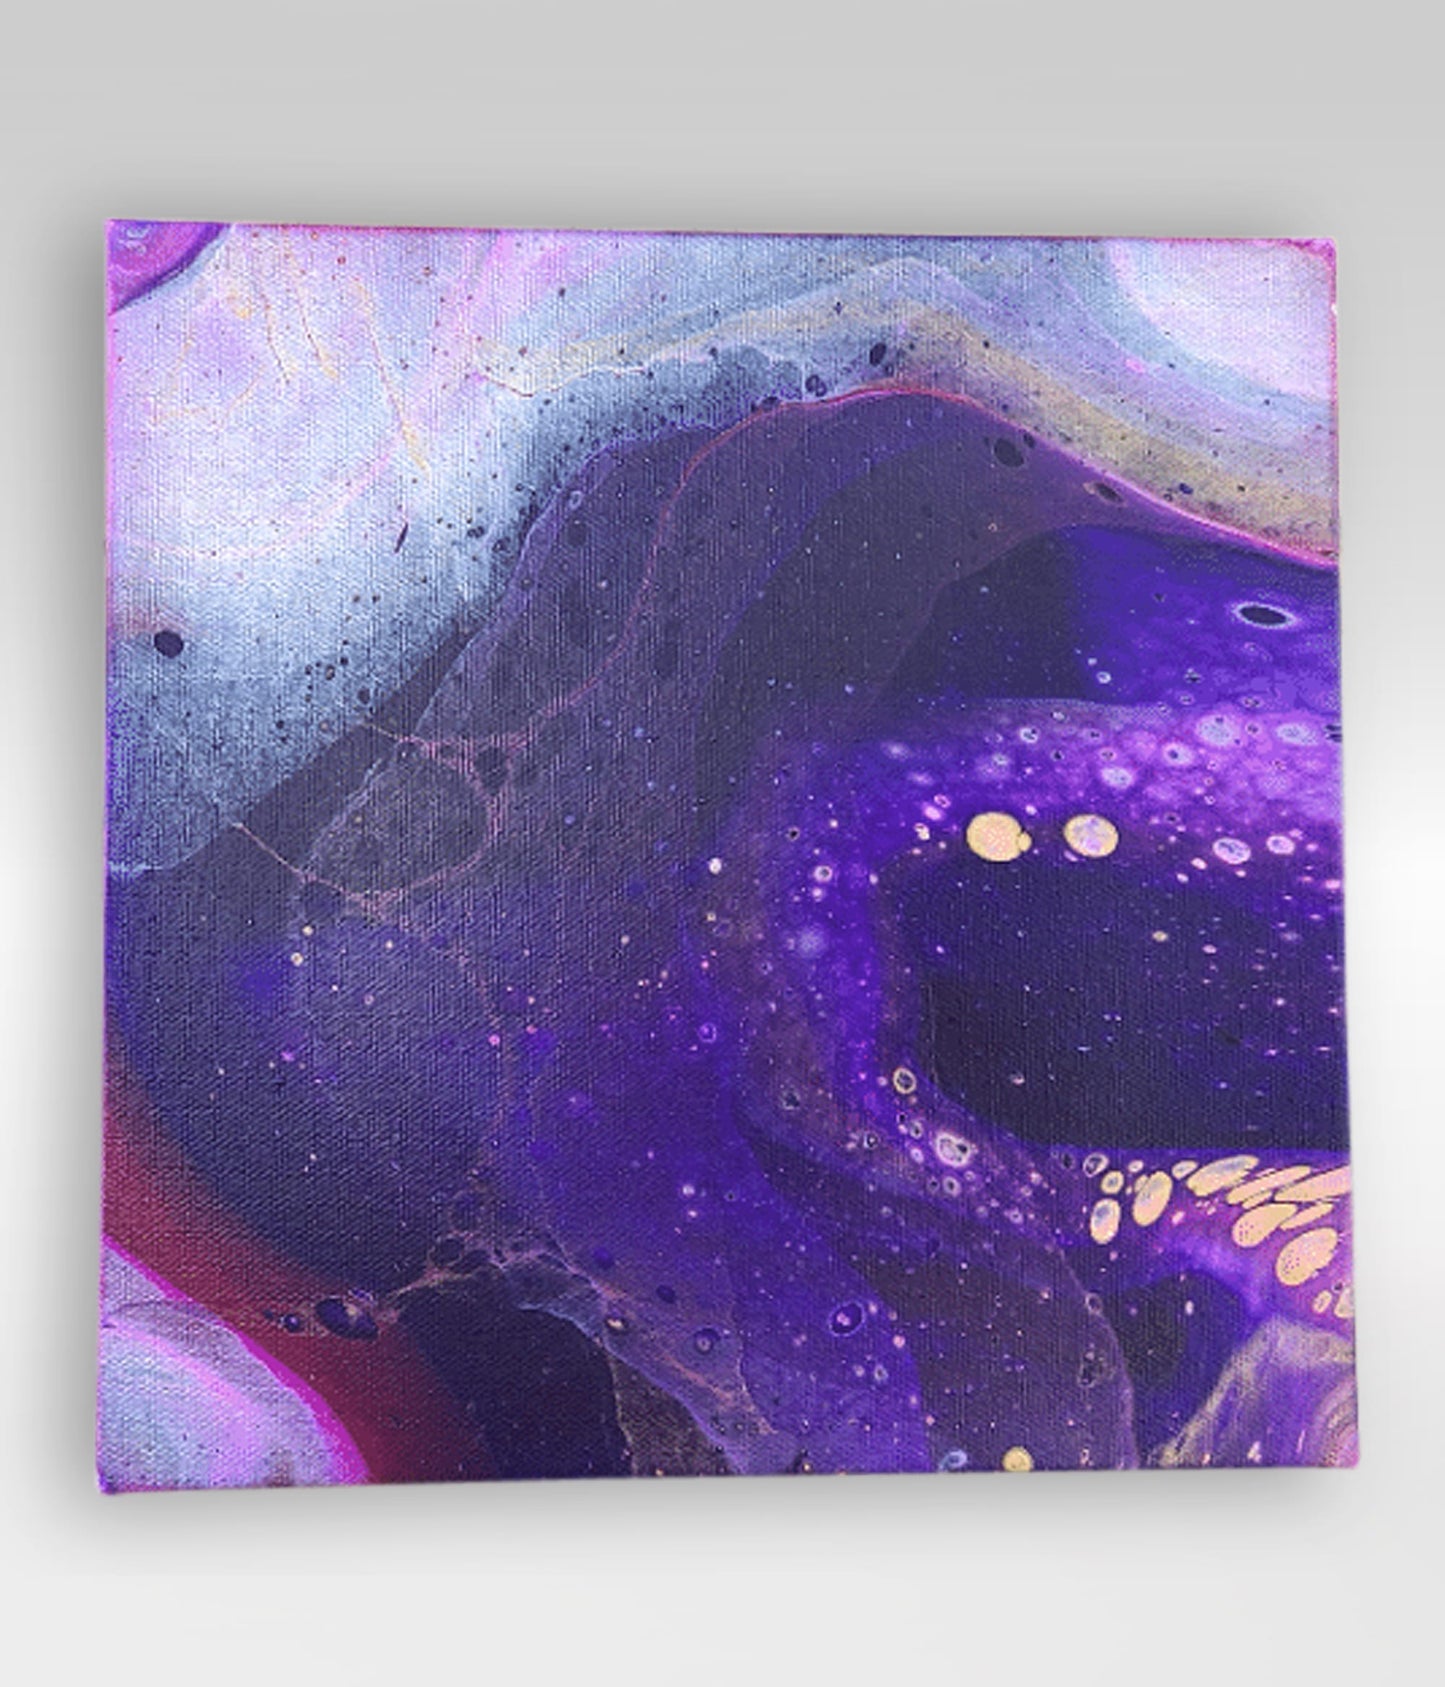 Octo-Nova – 10 x 10 Acrylic Pour Painting On Gallery Wrapped Canvas